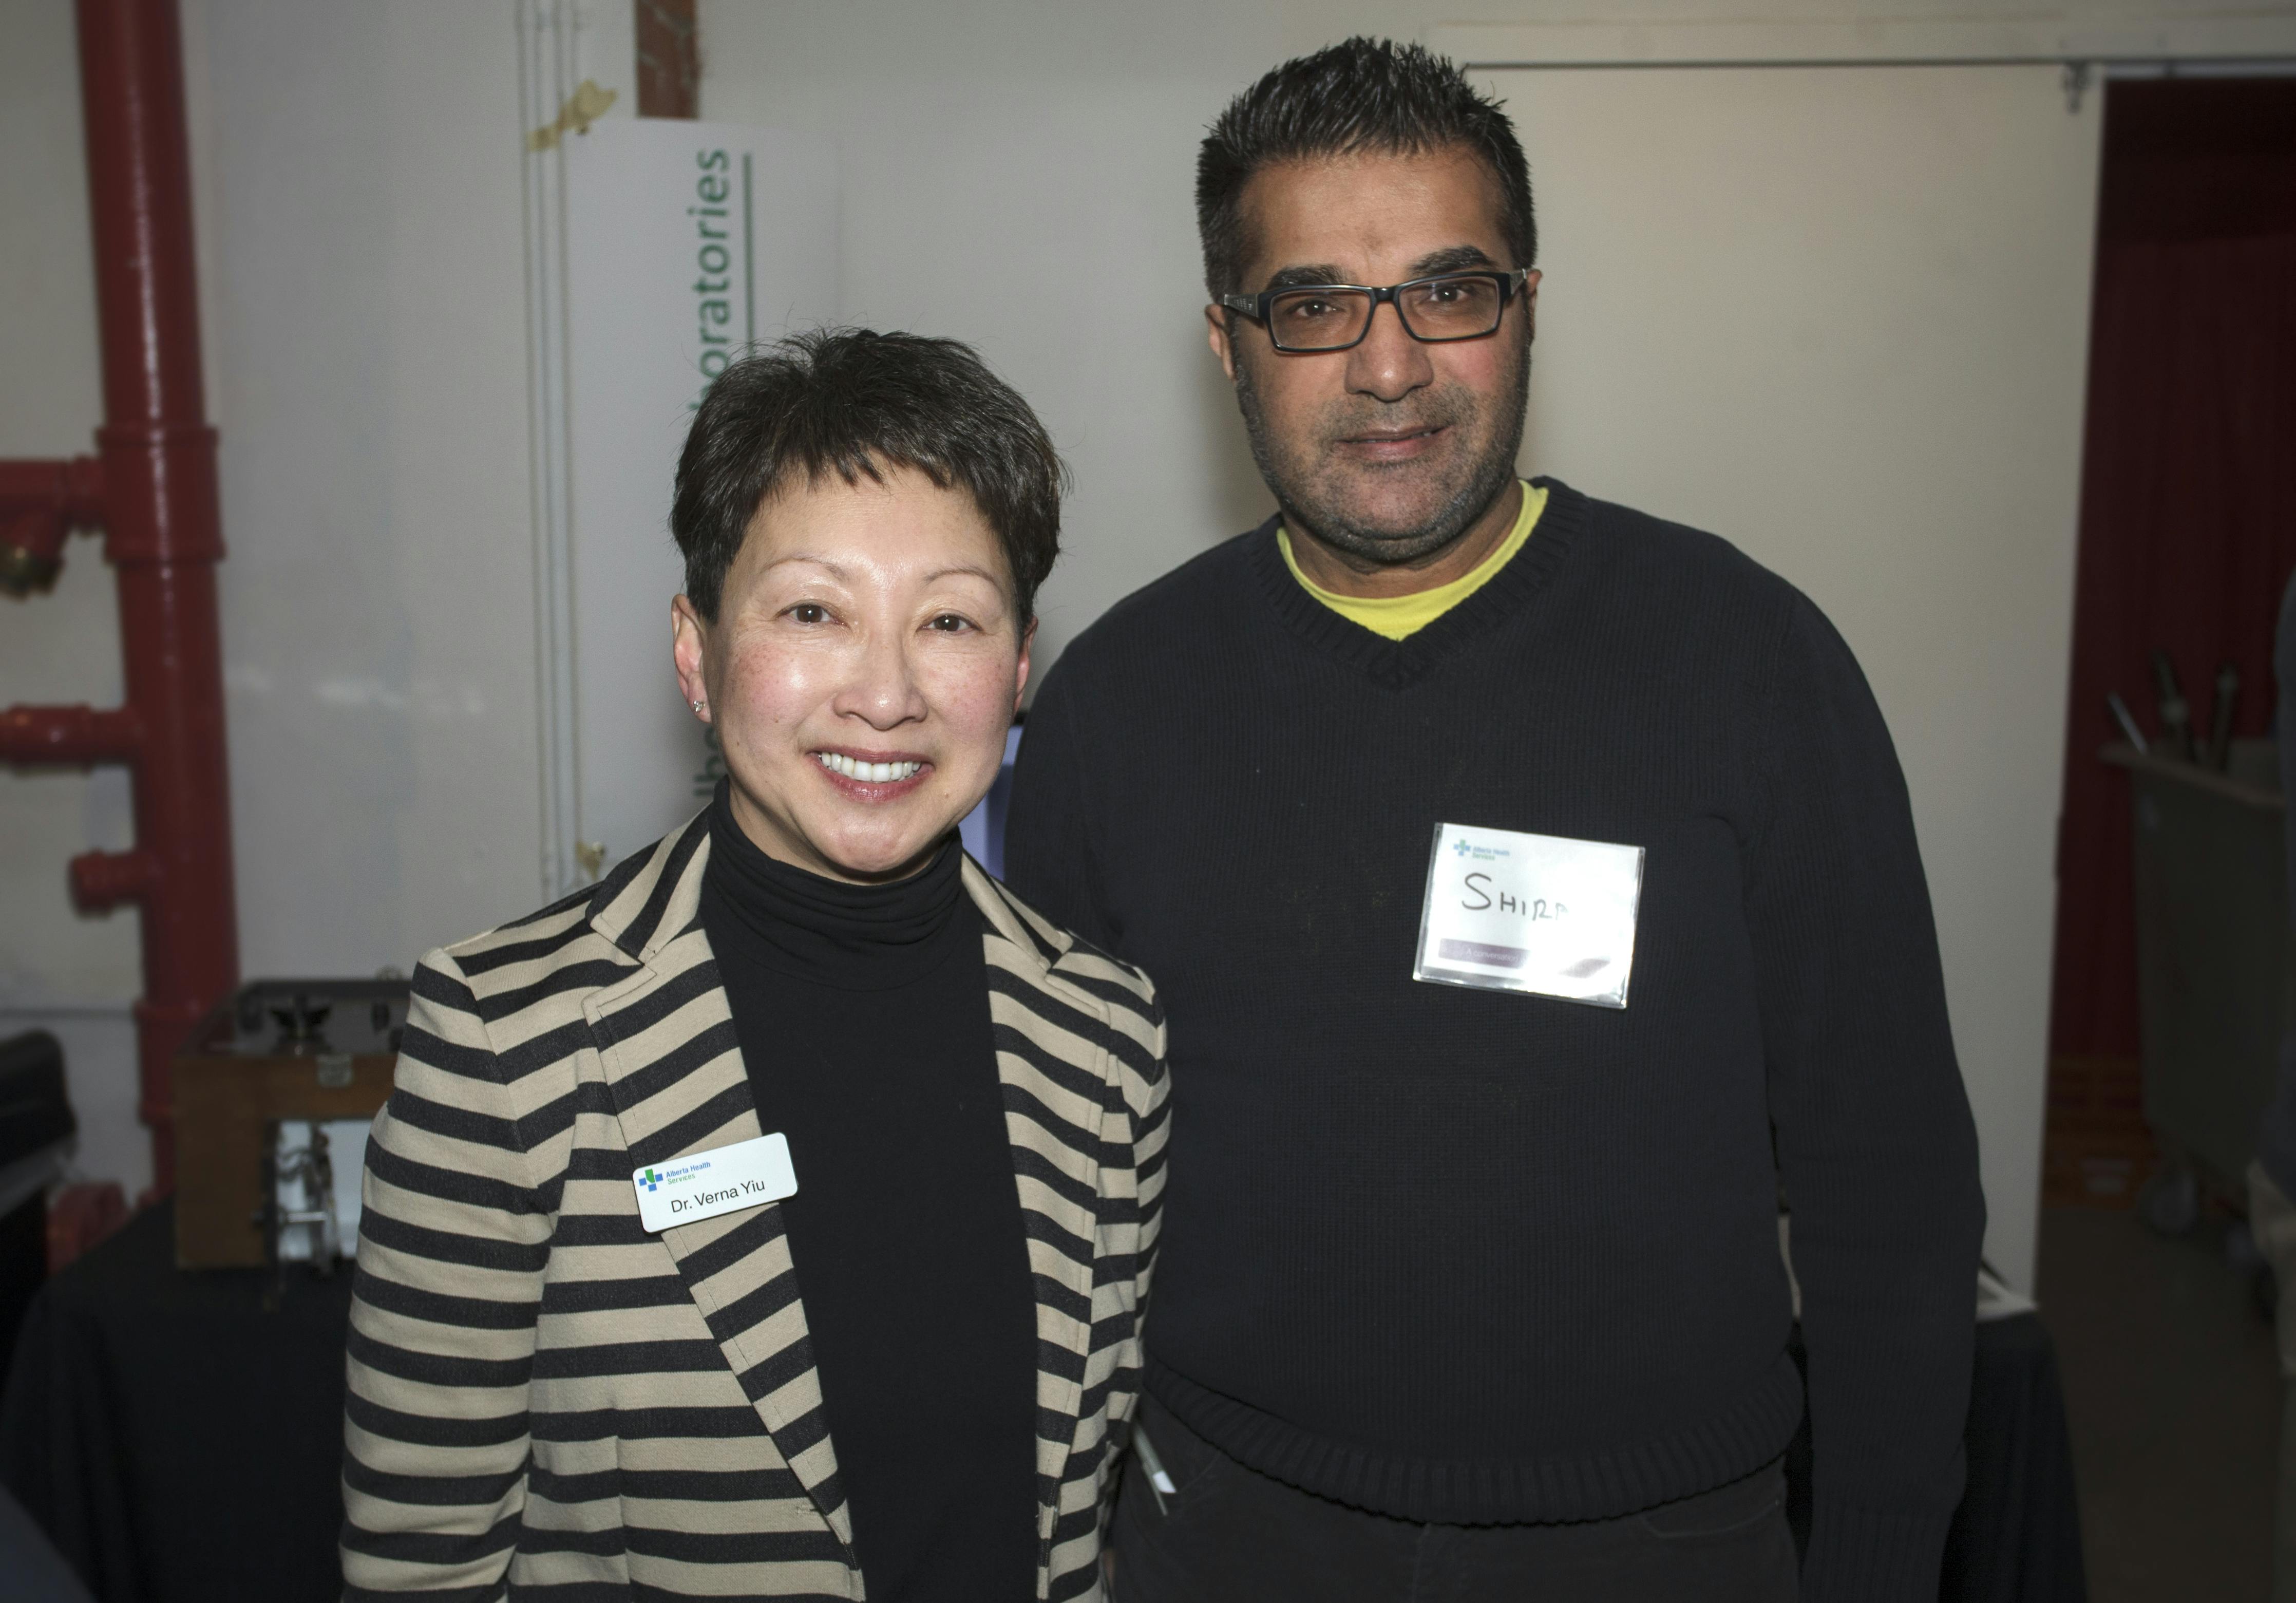 Conversation with Dr. Verna Yiu in Calgary